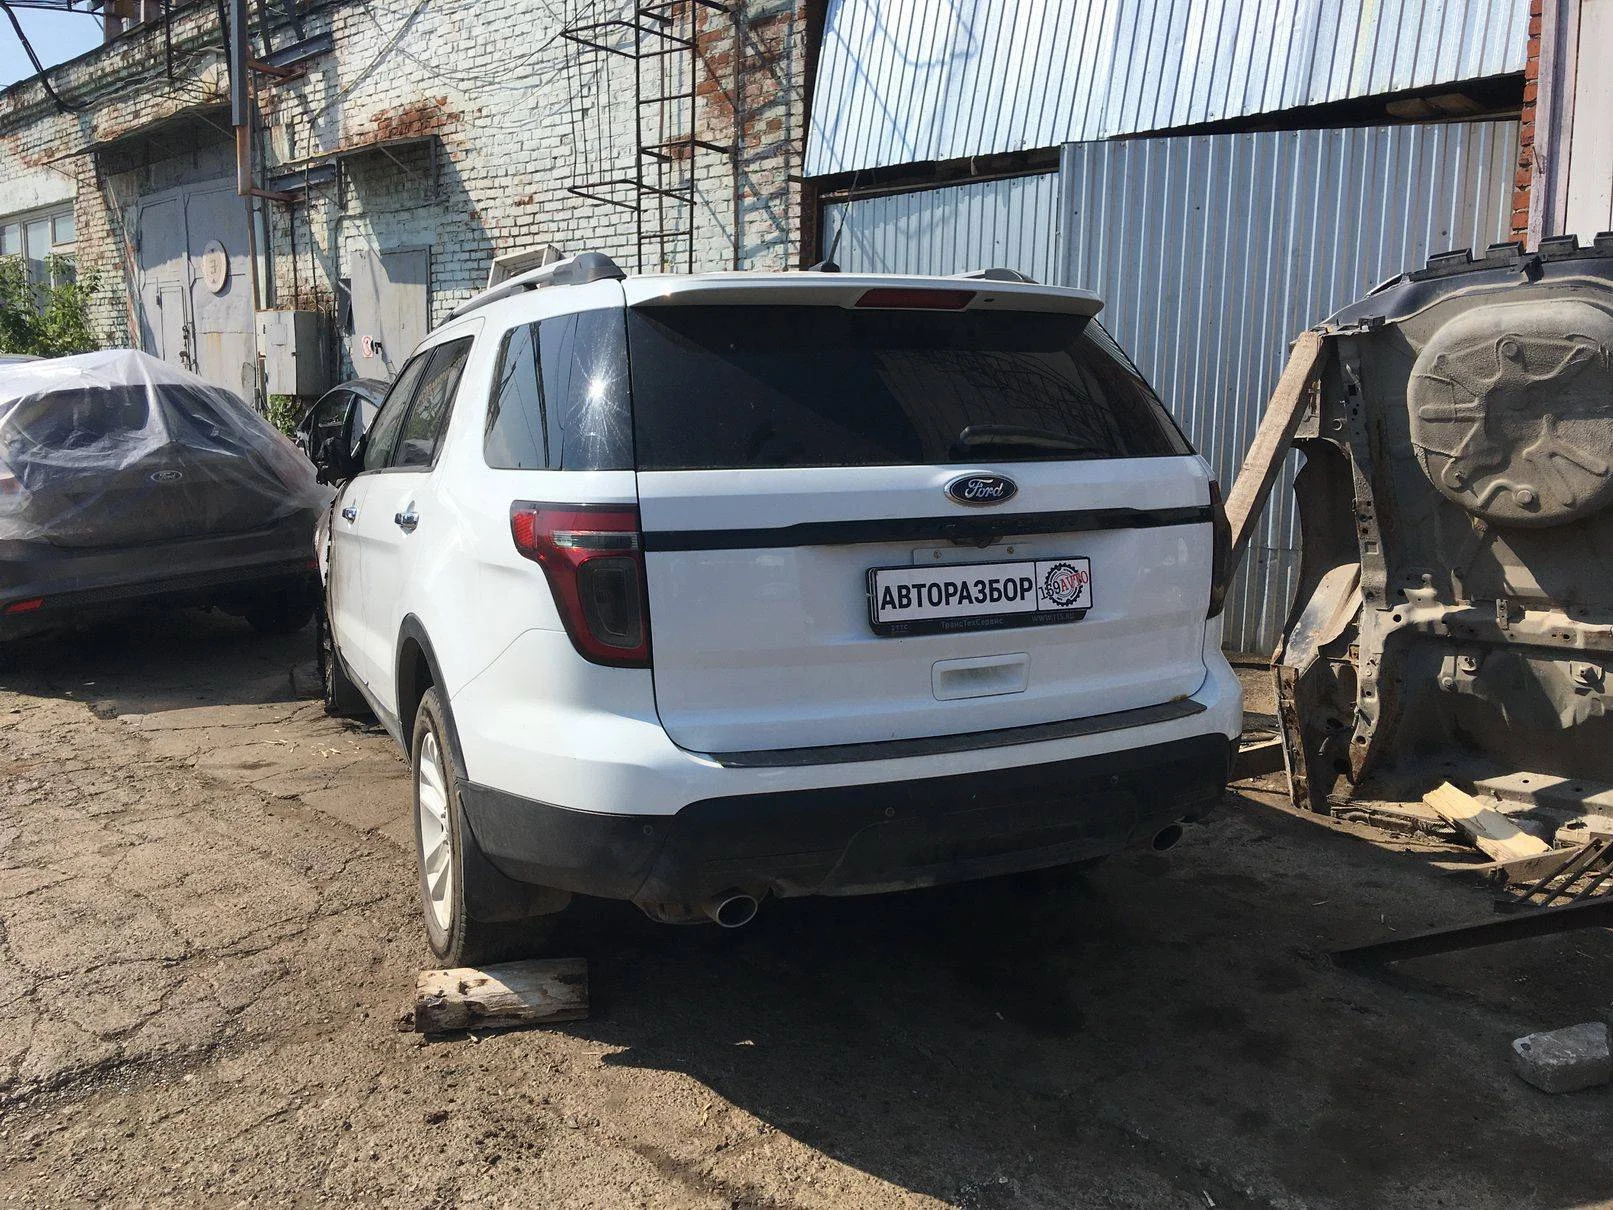 Продажа Ford Explorer 3.5 (294Hp) (Duratec Ti-VCT) 4WD AT по запчастям